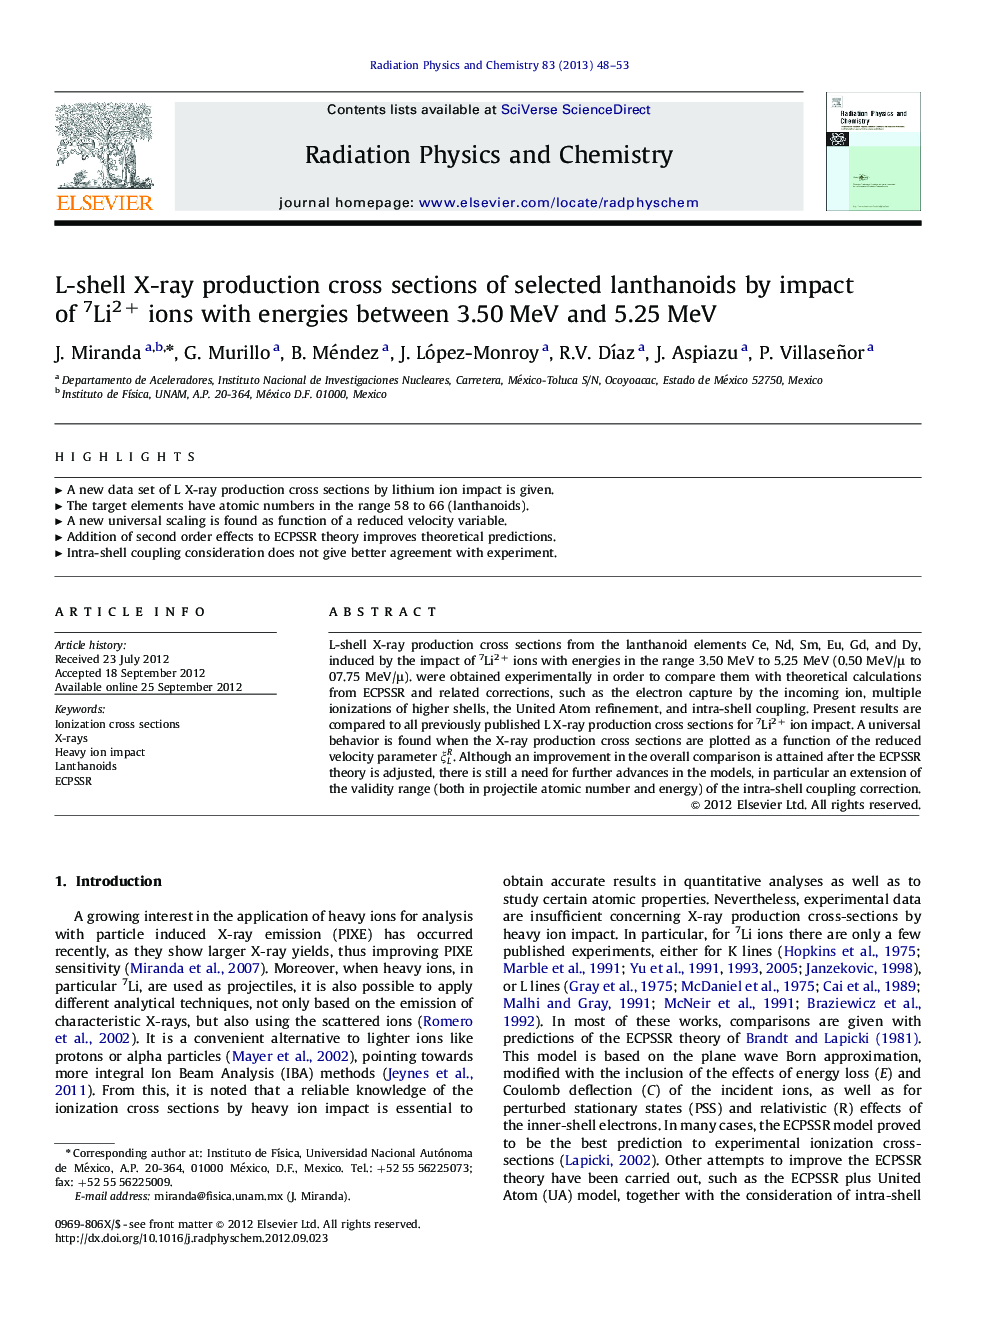 L-shell X-ray production cross sections of selected lanthanoids by impact of 7Li2+ ions with energies between 3.50 MeV and 5.25 MeV